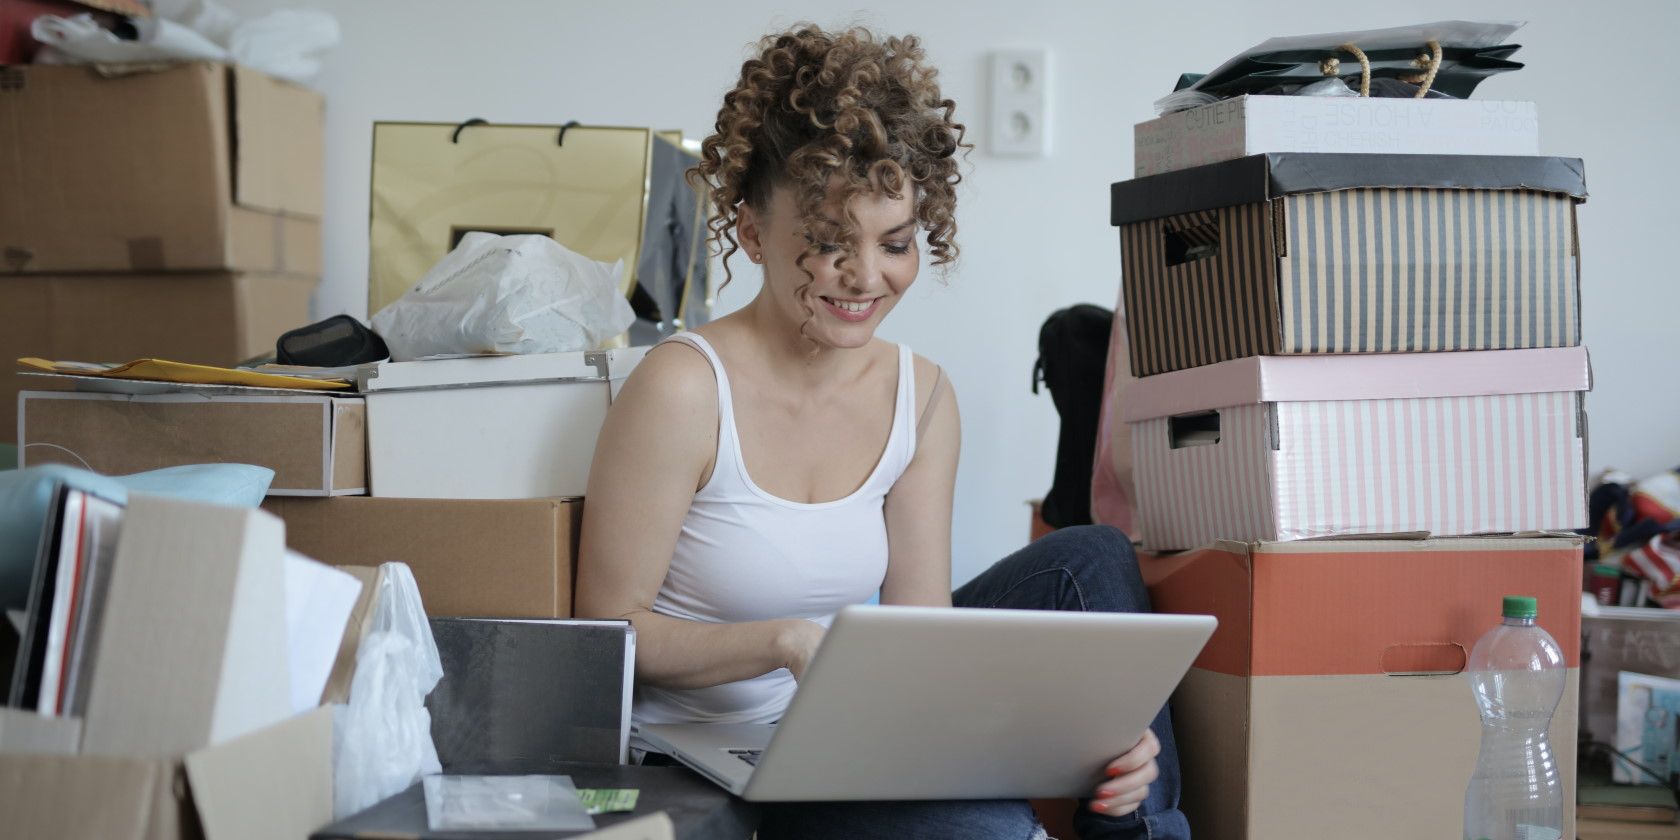 woman sitting in clutter using laptop